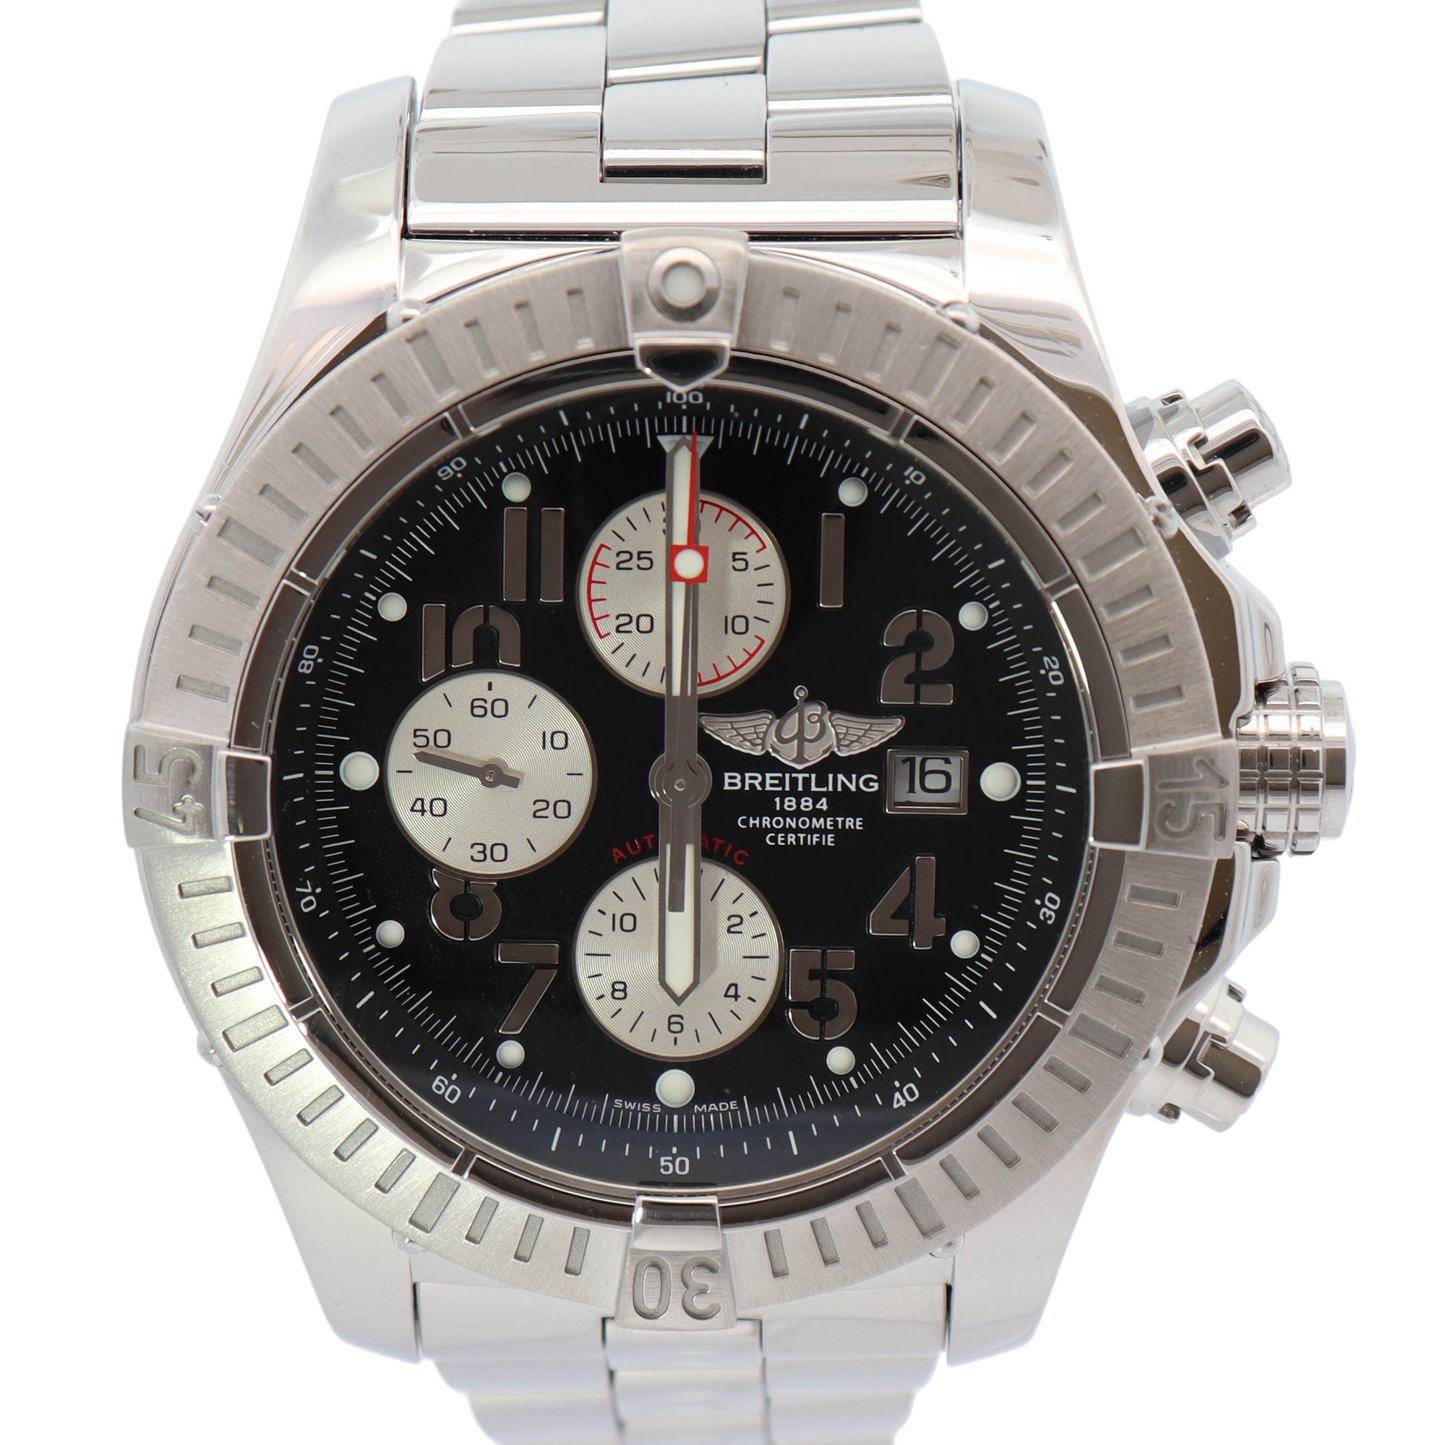 Load image into Gallery viewer, Breitling Super Avenger Stainless Steel 48mm Black Chronograph Dial Watch Reference#: A13370 - Happy Jewelers Fine Jewelry Lifetime Warranty
